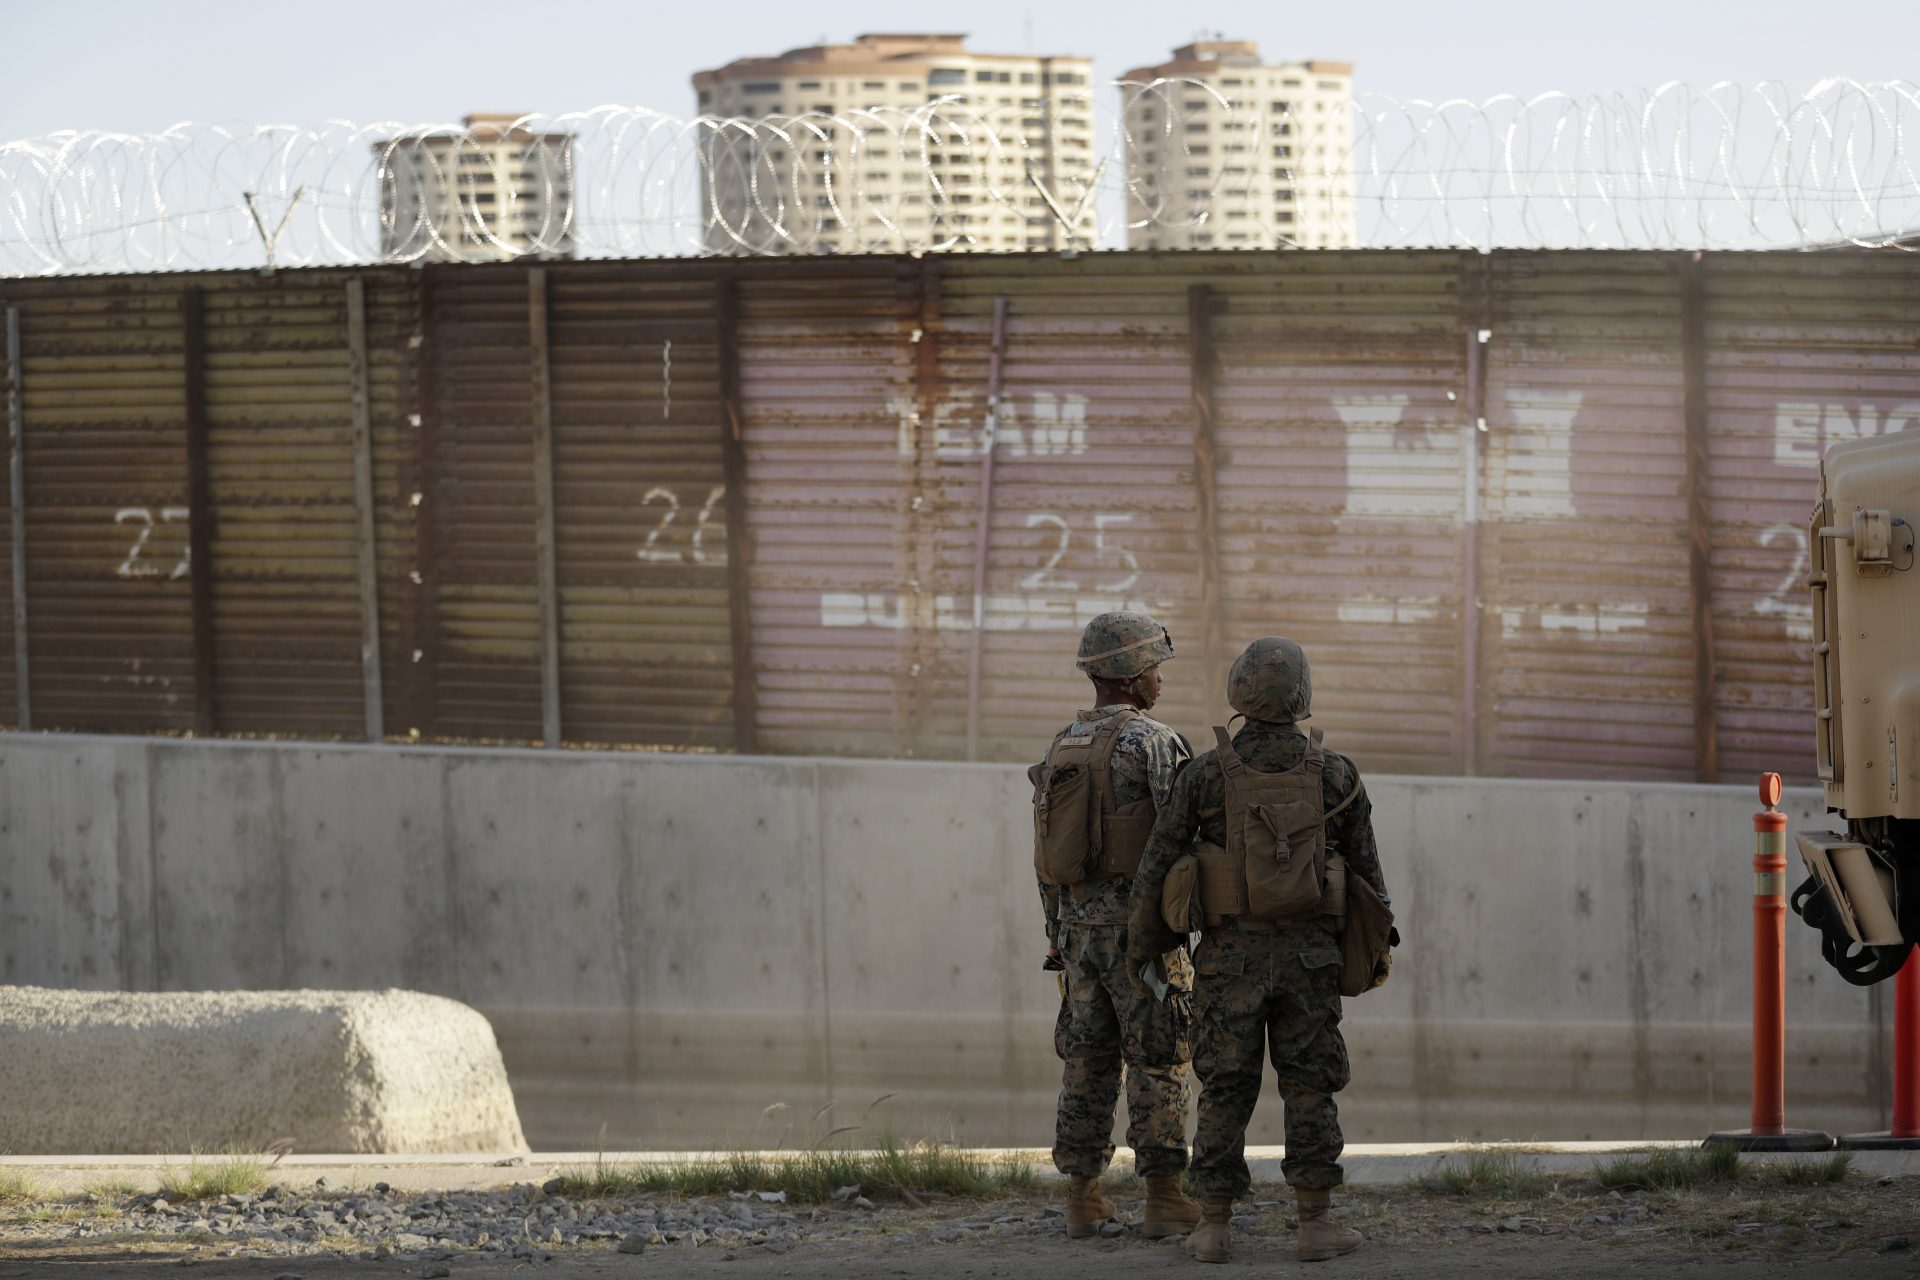 FILE PHOTO: Marines look on during work to fortify the border structure that separates Tijuana, Mexico, behind, and San Diego, near the San Ysidro Port of Entry, Friday, Nov. 9, 2018, in San Diego.